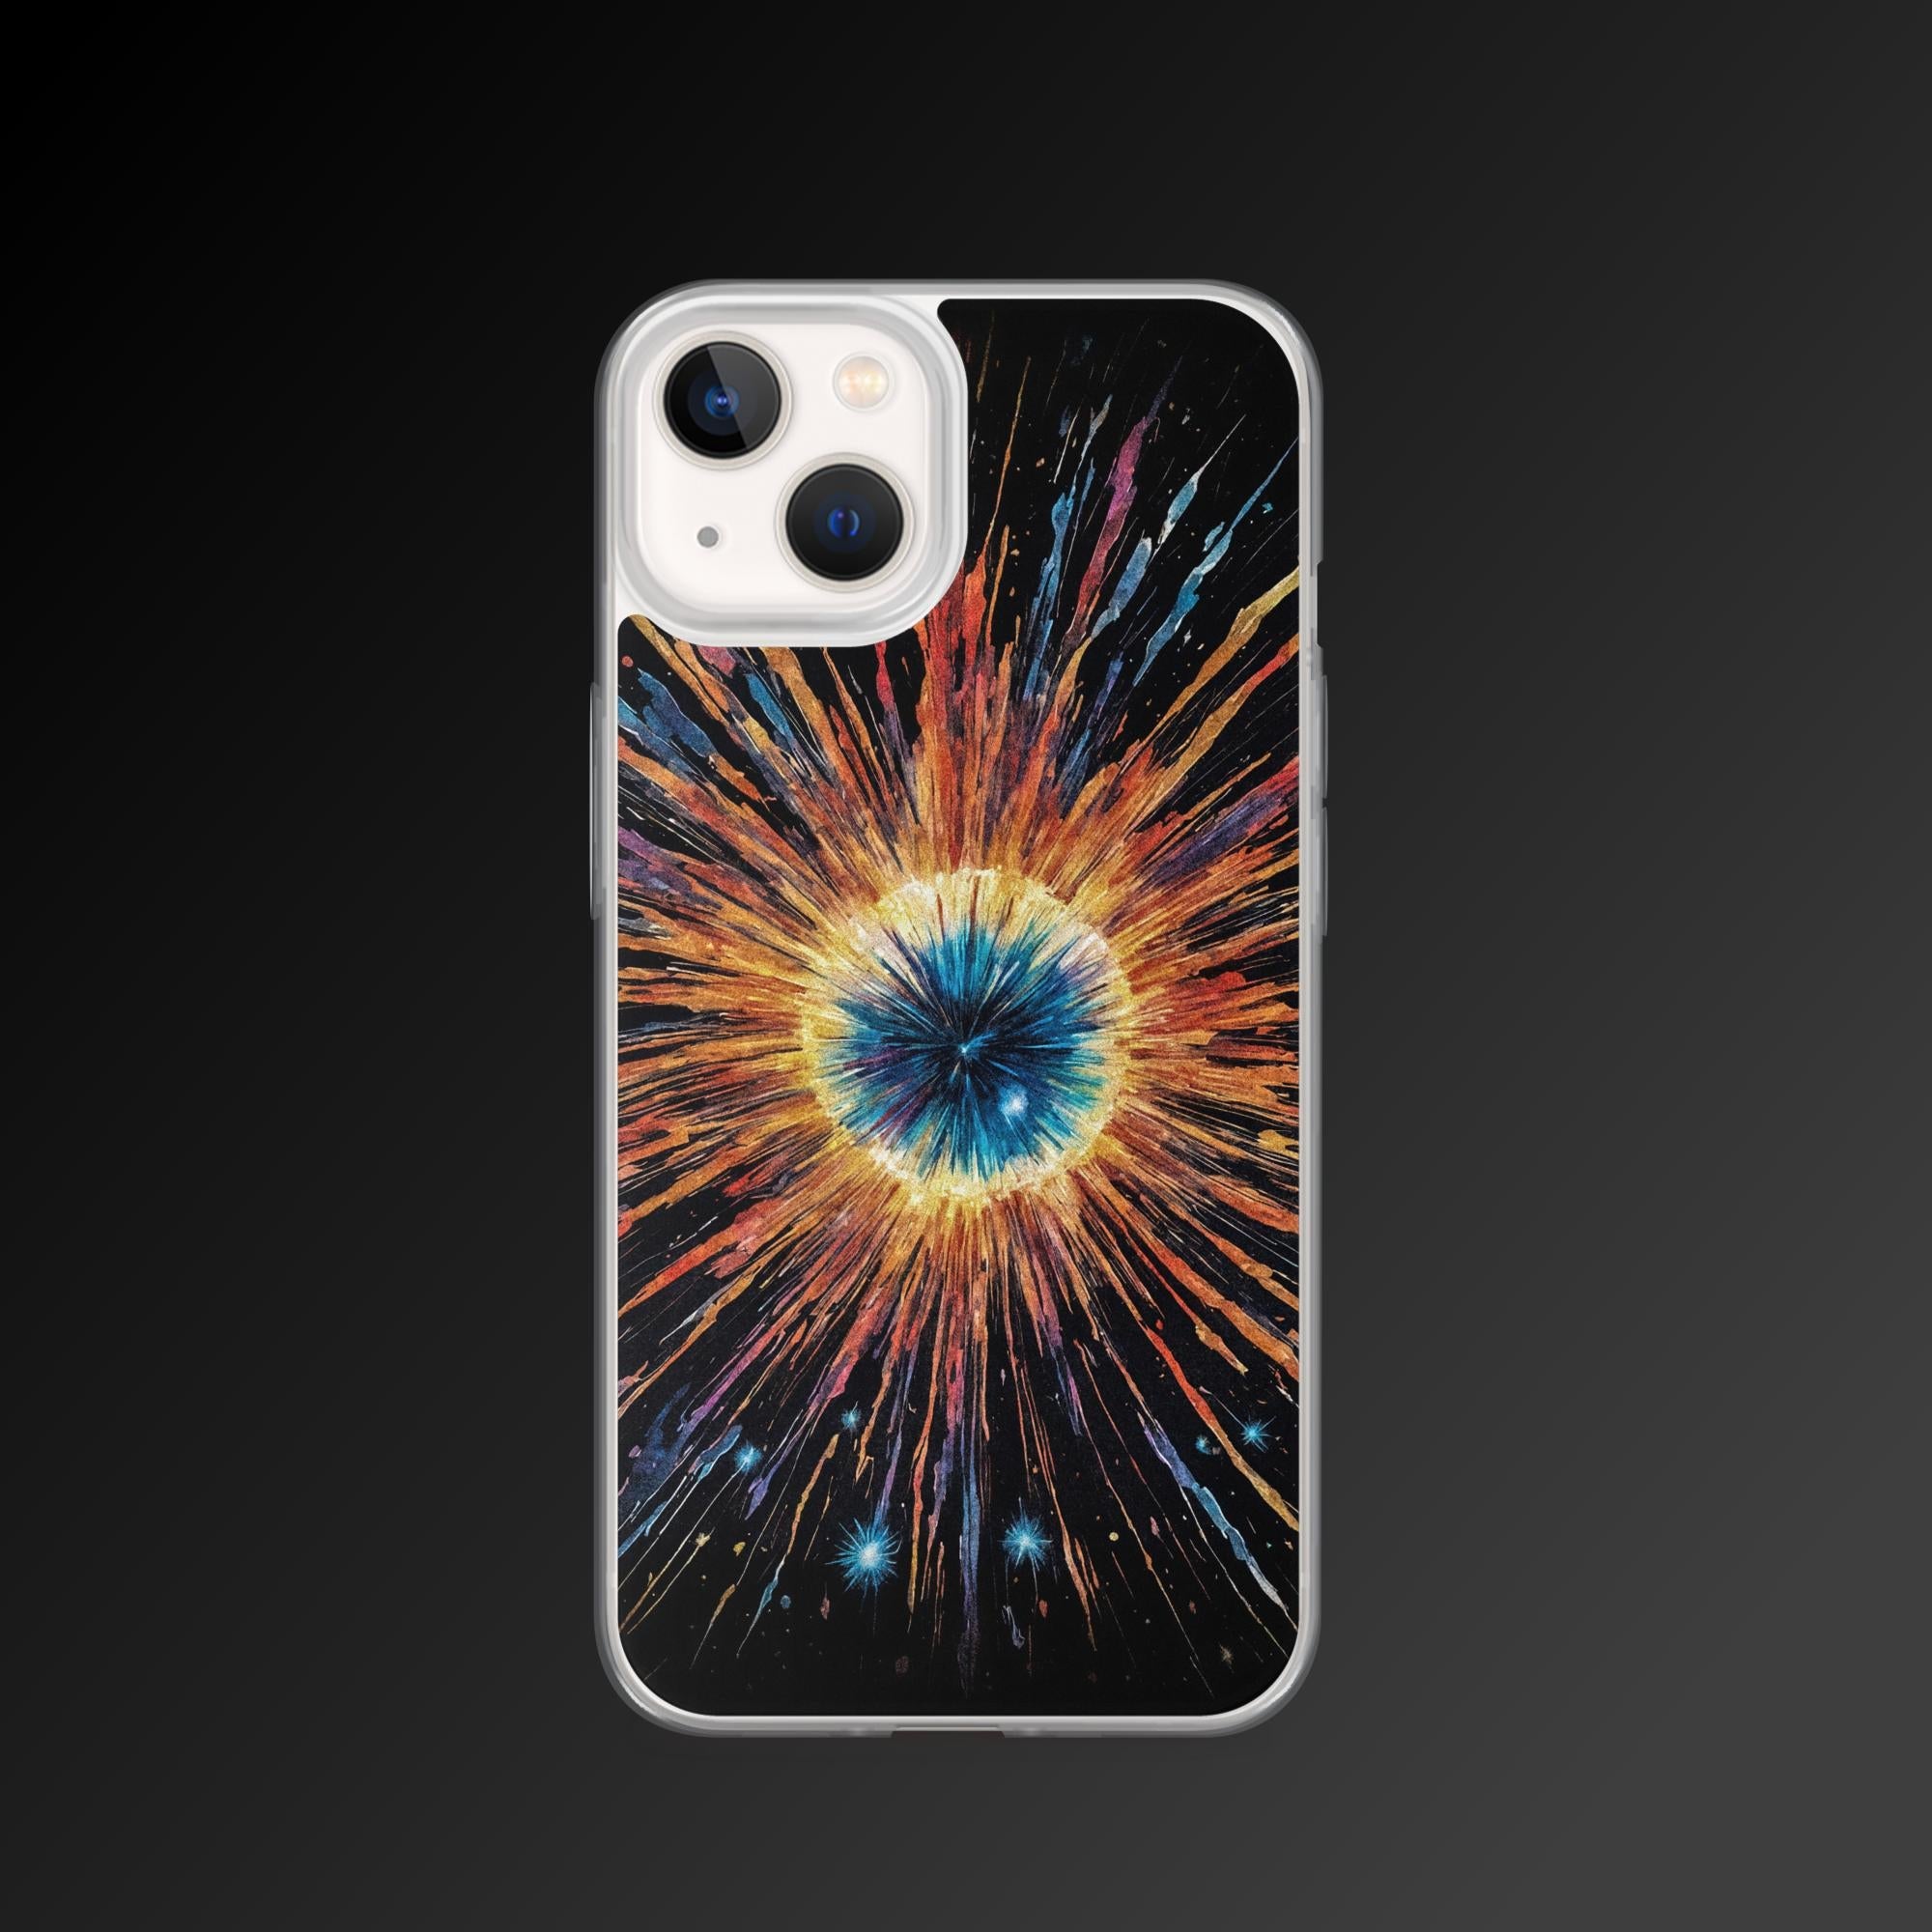 "Chroma blast" clear iphone case - Clear iphone case - Ever colorful